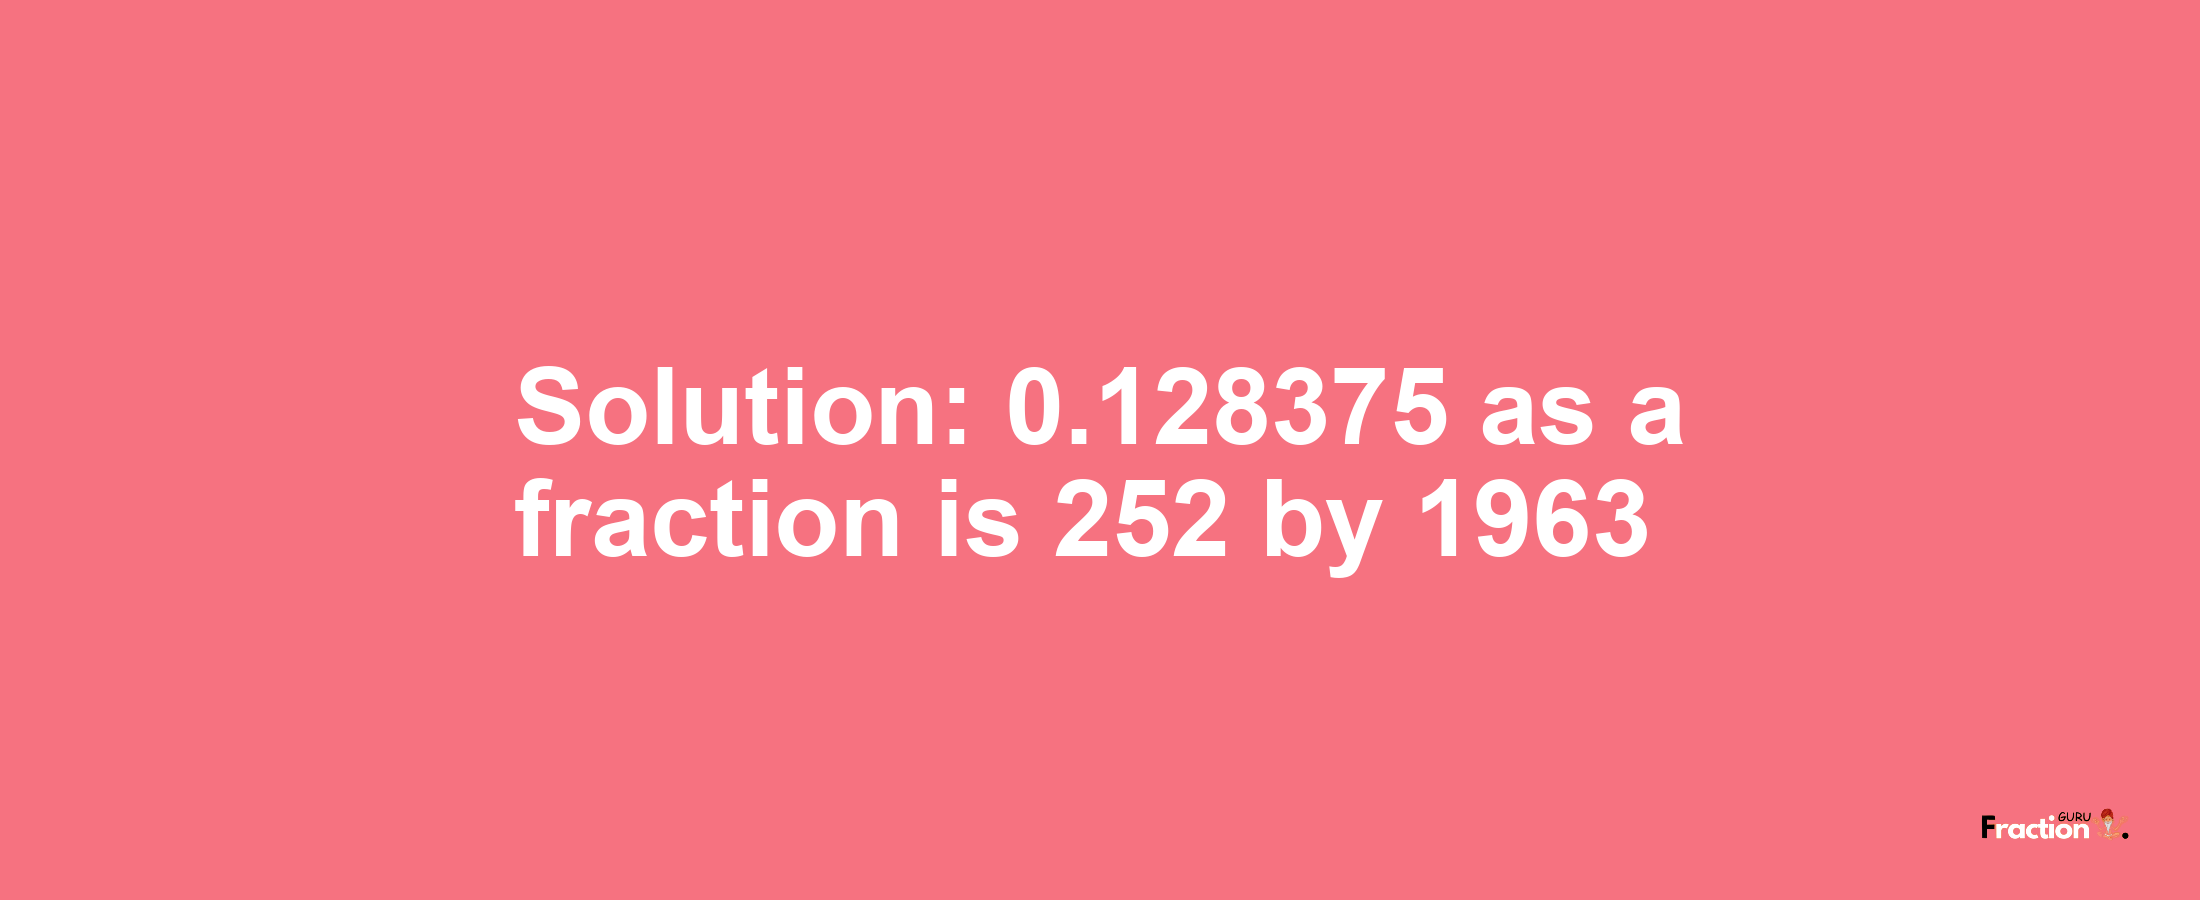 Solution:0.128375 as a fraction is 252/1963